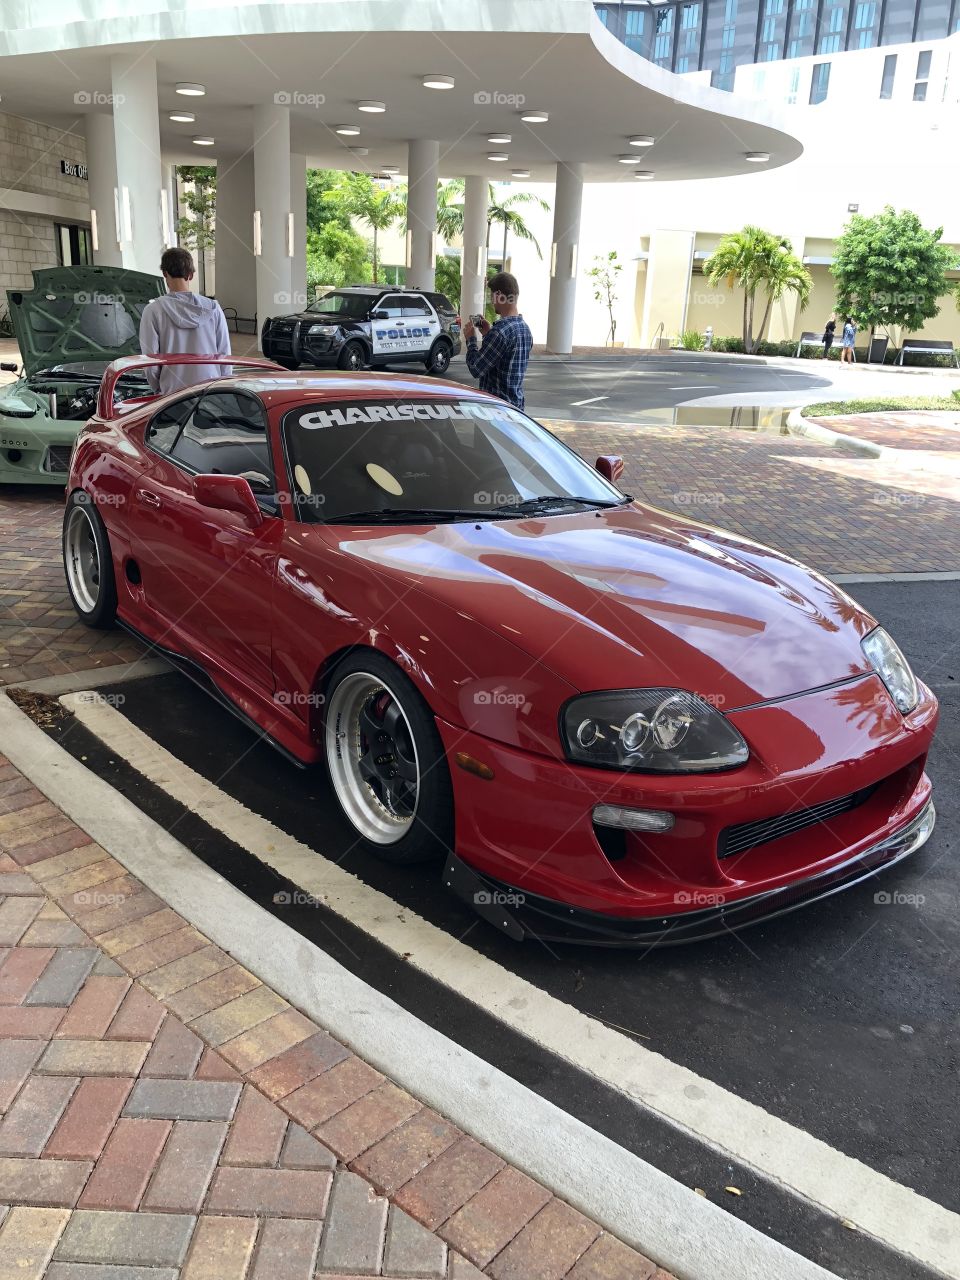 Here is a beautiful red Toyota Supra MK4 at stancenation 